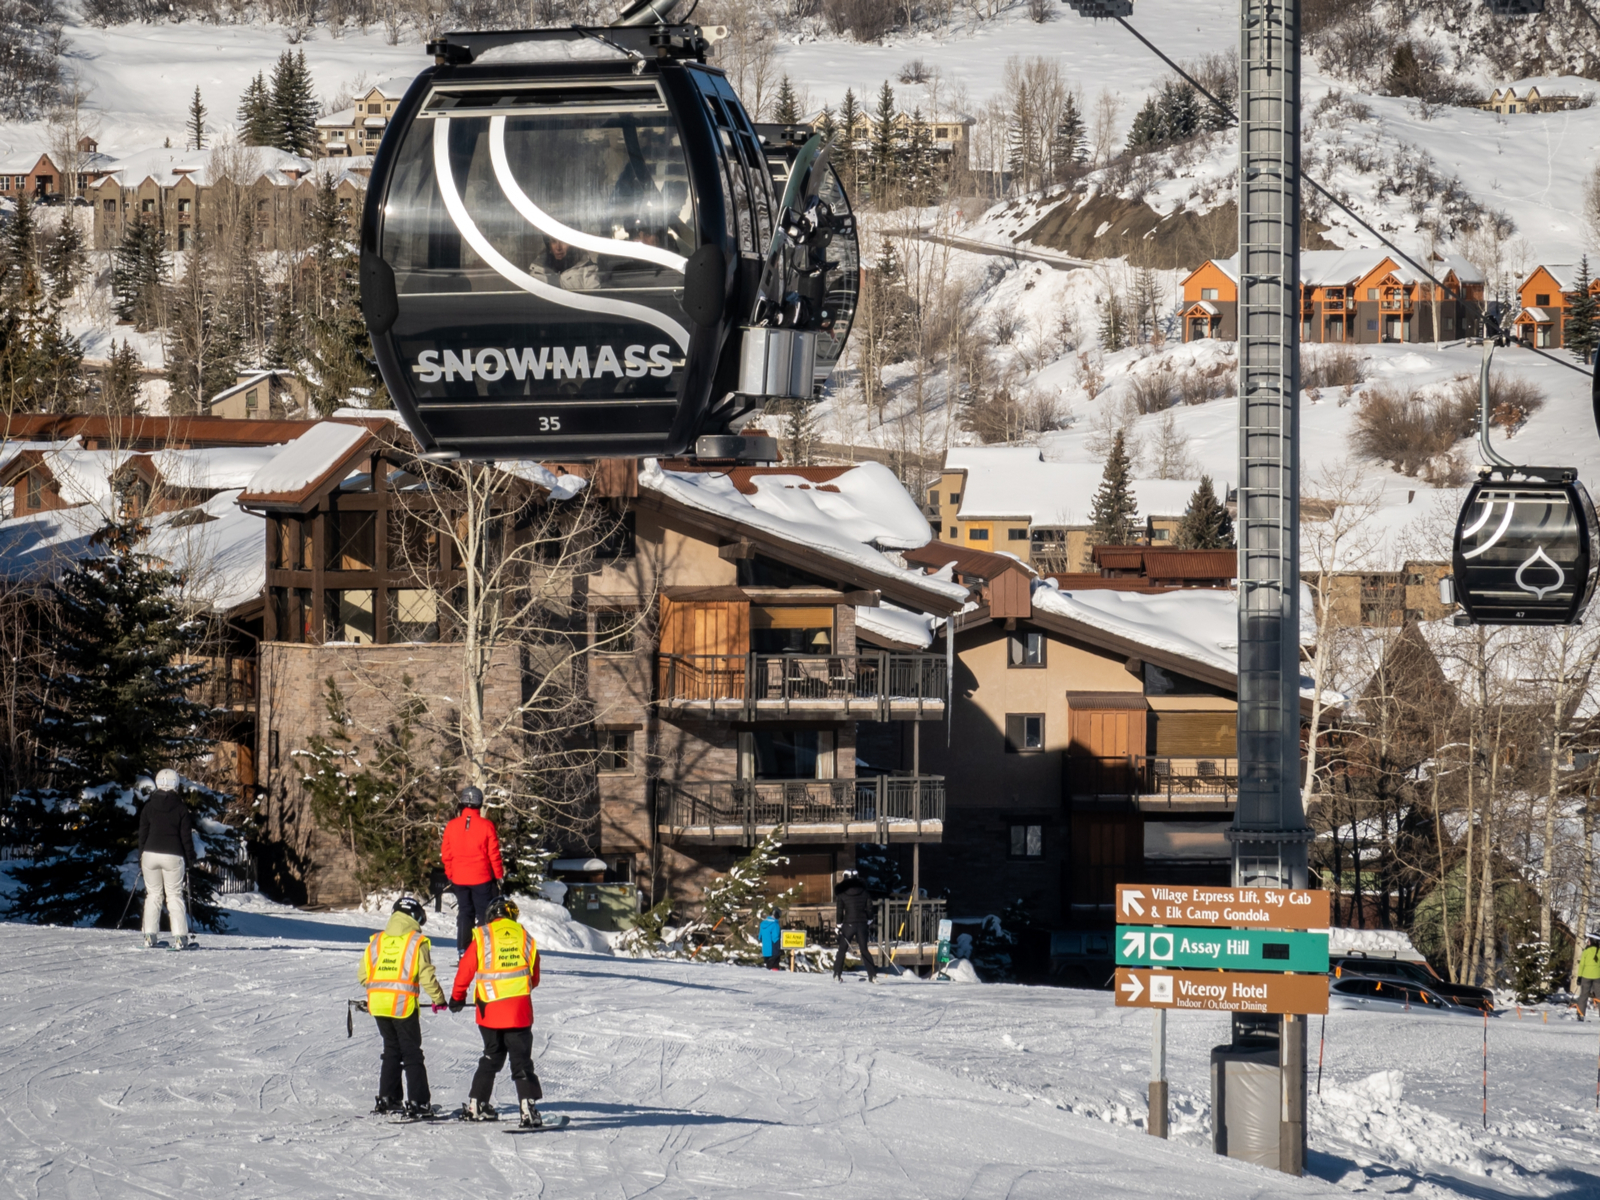 People in vests and skis at Snowmass, one of the best ski resorts near Denver